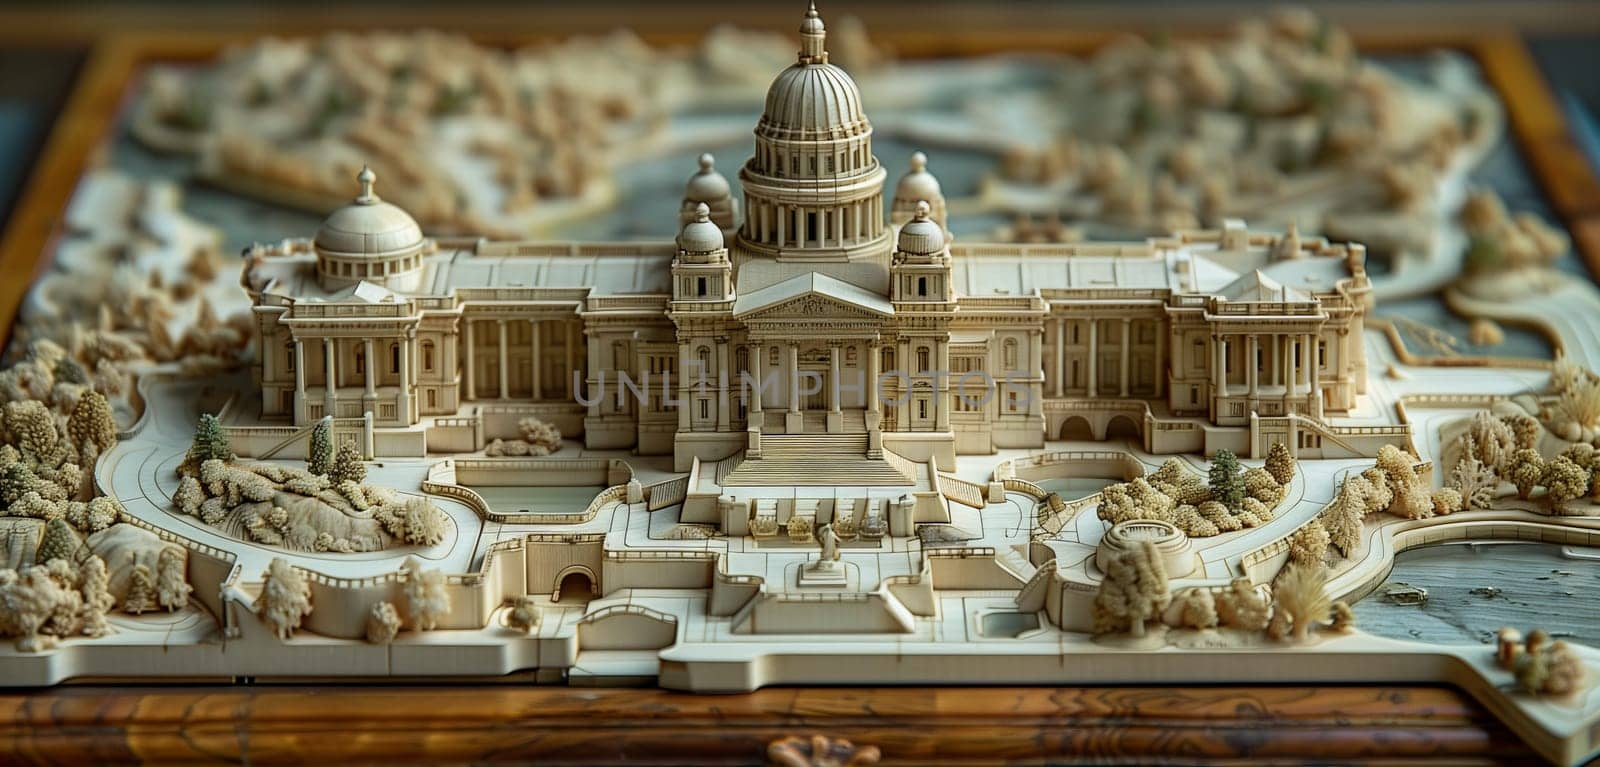 An art model of the Capitol Building rests on a wooden table by richwolf